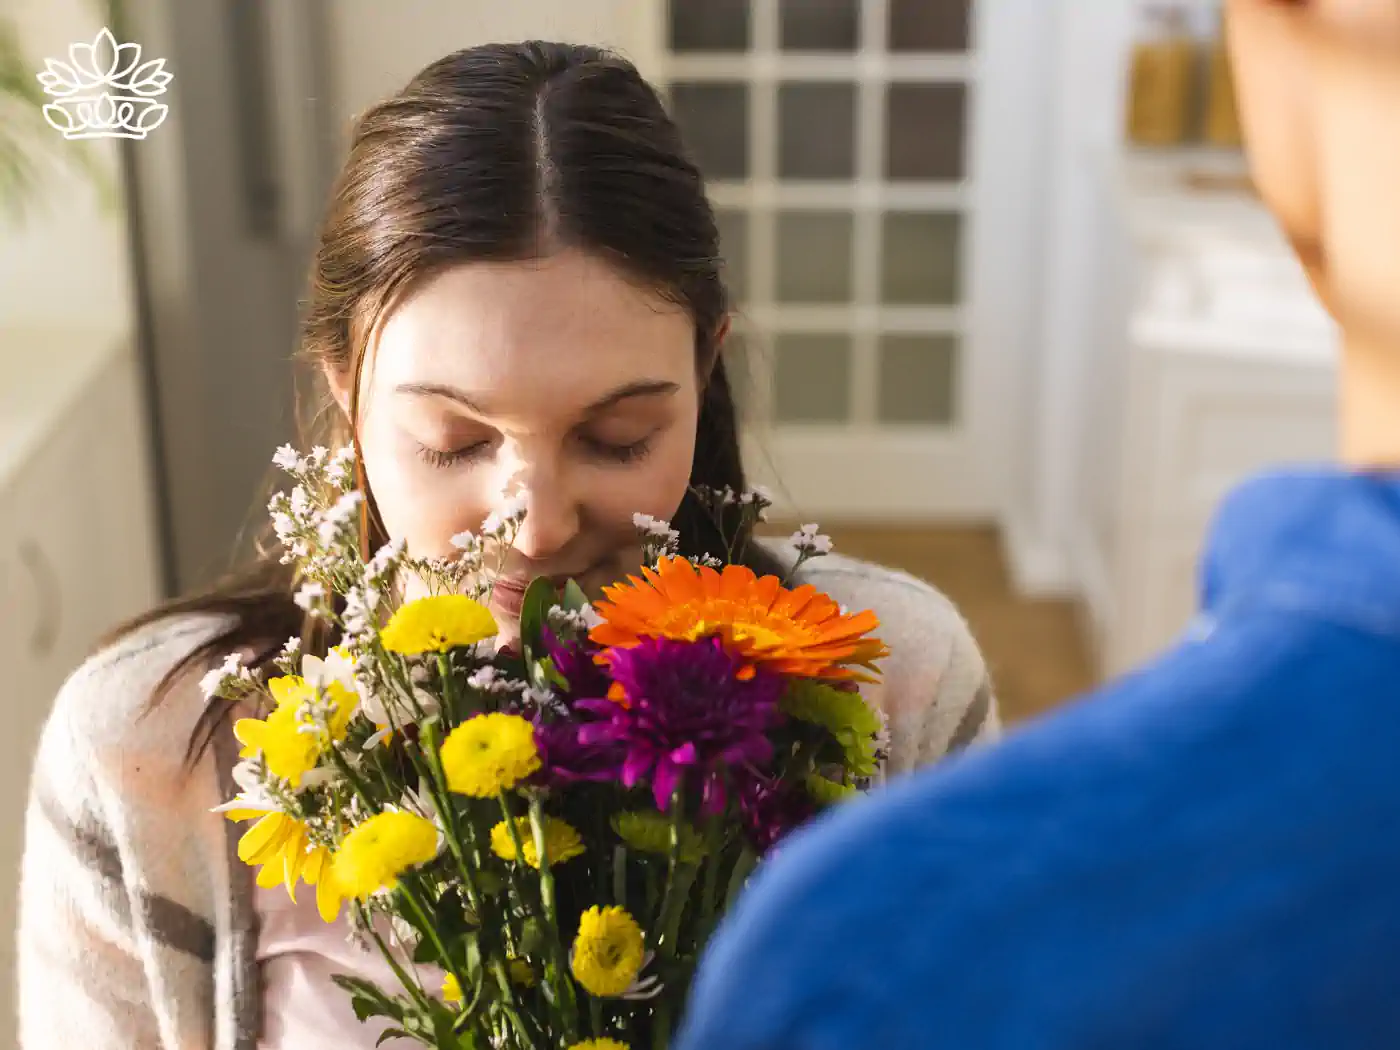 A woman joyfully smelling a colorful bouquet of fresh flowers including orange gerberas and yellow daisies, gifted by a person visible only from the back.